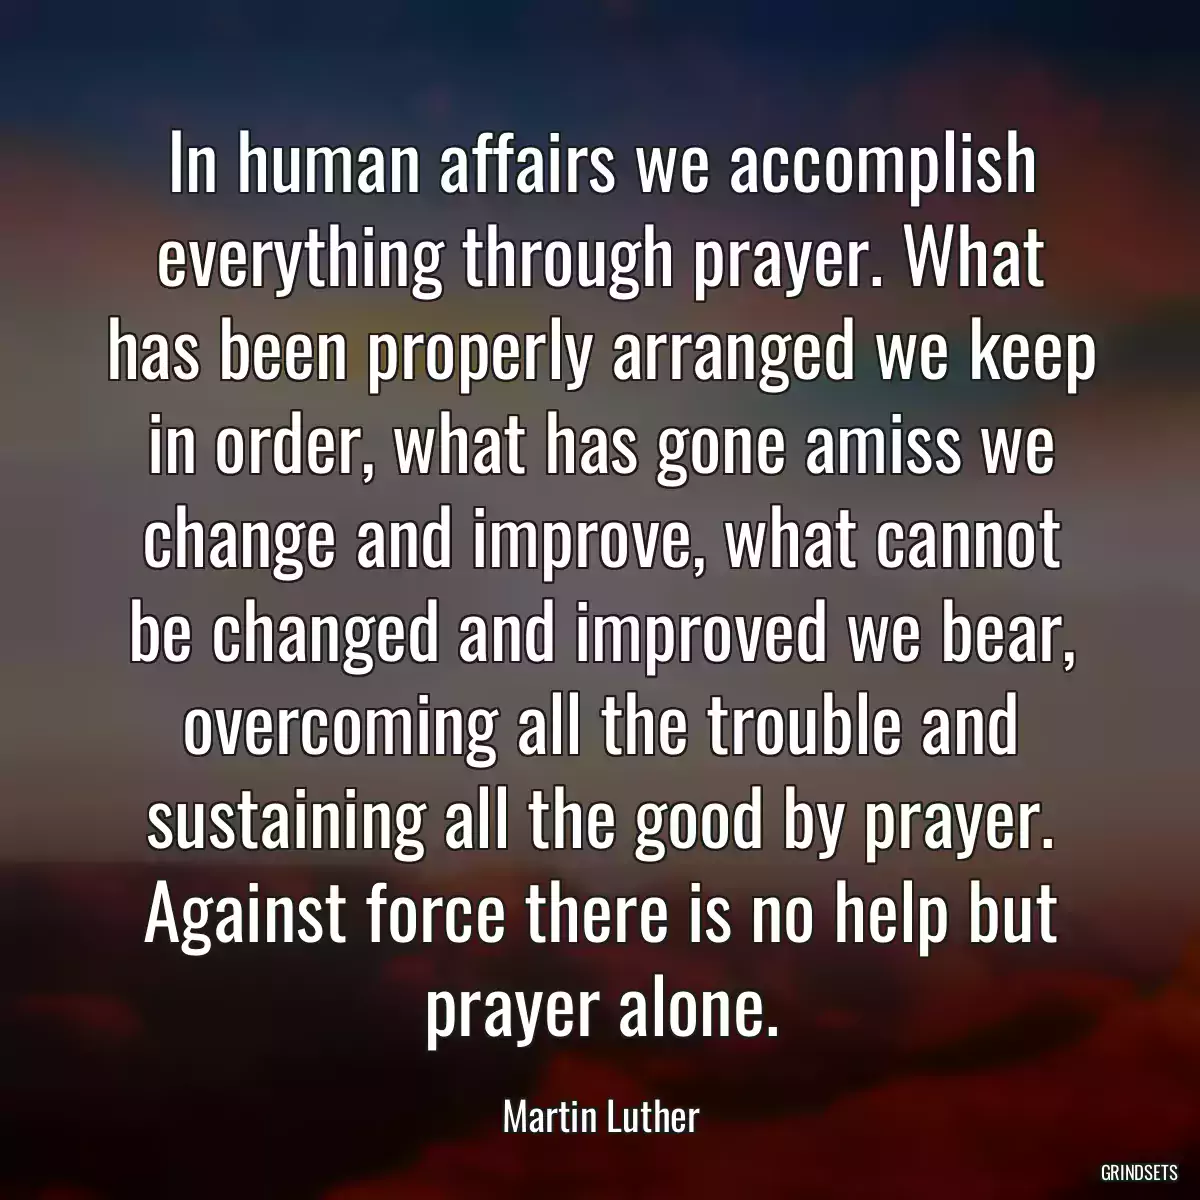 In human affairs we accomplish everything through prayer. What has been properly arranged we keep in order, what has gone amiss we change and improve, what cannot be changed and improved we bear, overcoming all the trouble and sustaining all the good by prayer. Against force there is no help but prayer alone.